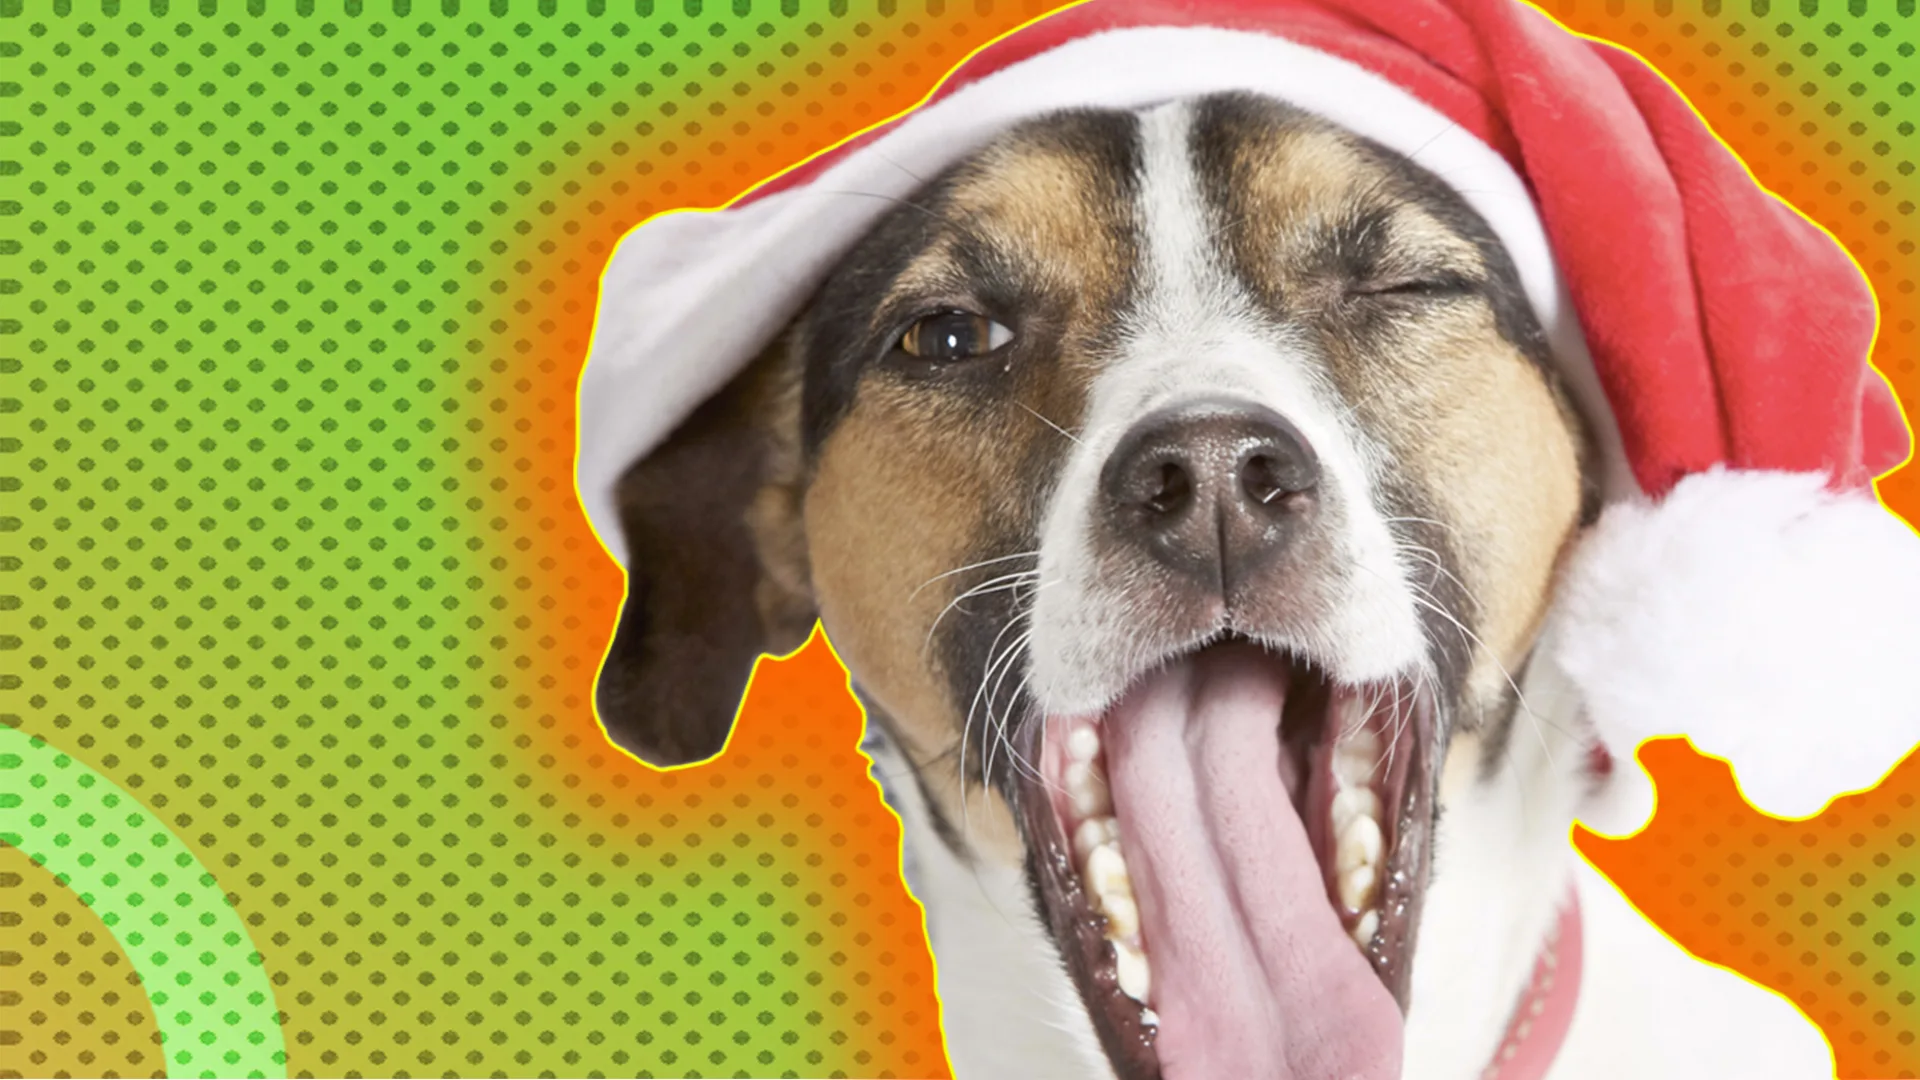 Close-up of Jack Russell Terrier wearing santa hat, smiling and winking, outlined by orange halo effect on green-dotted background.